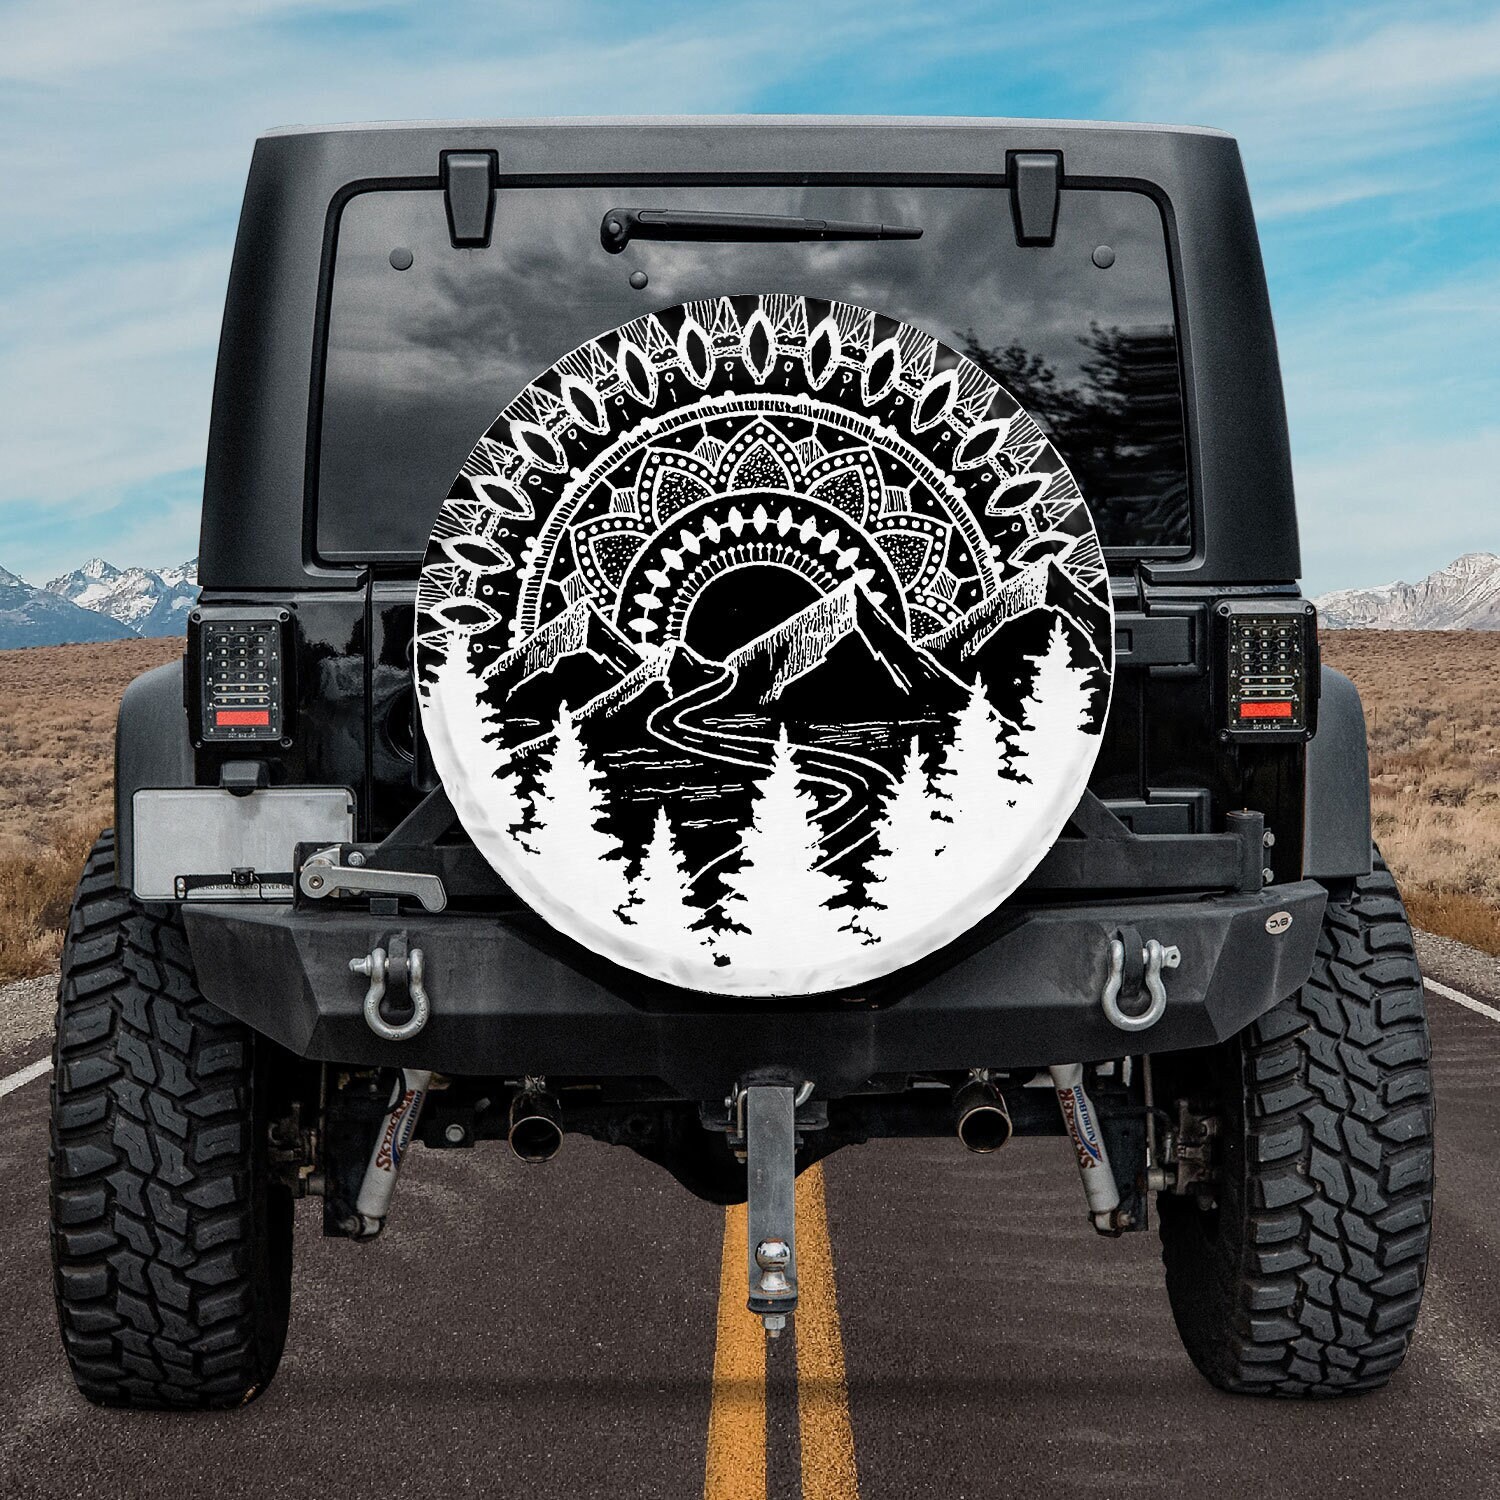 Spare Tire Cover Tiger Design Art Print Thickening Universal Wheel Tire Cover 14 Inch Fit for Jeep Wrangler,Trailer,RV,Honda CR-V 